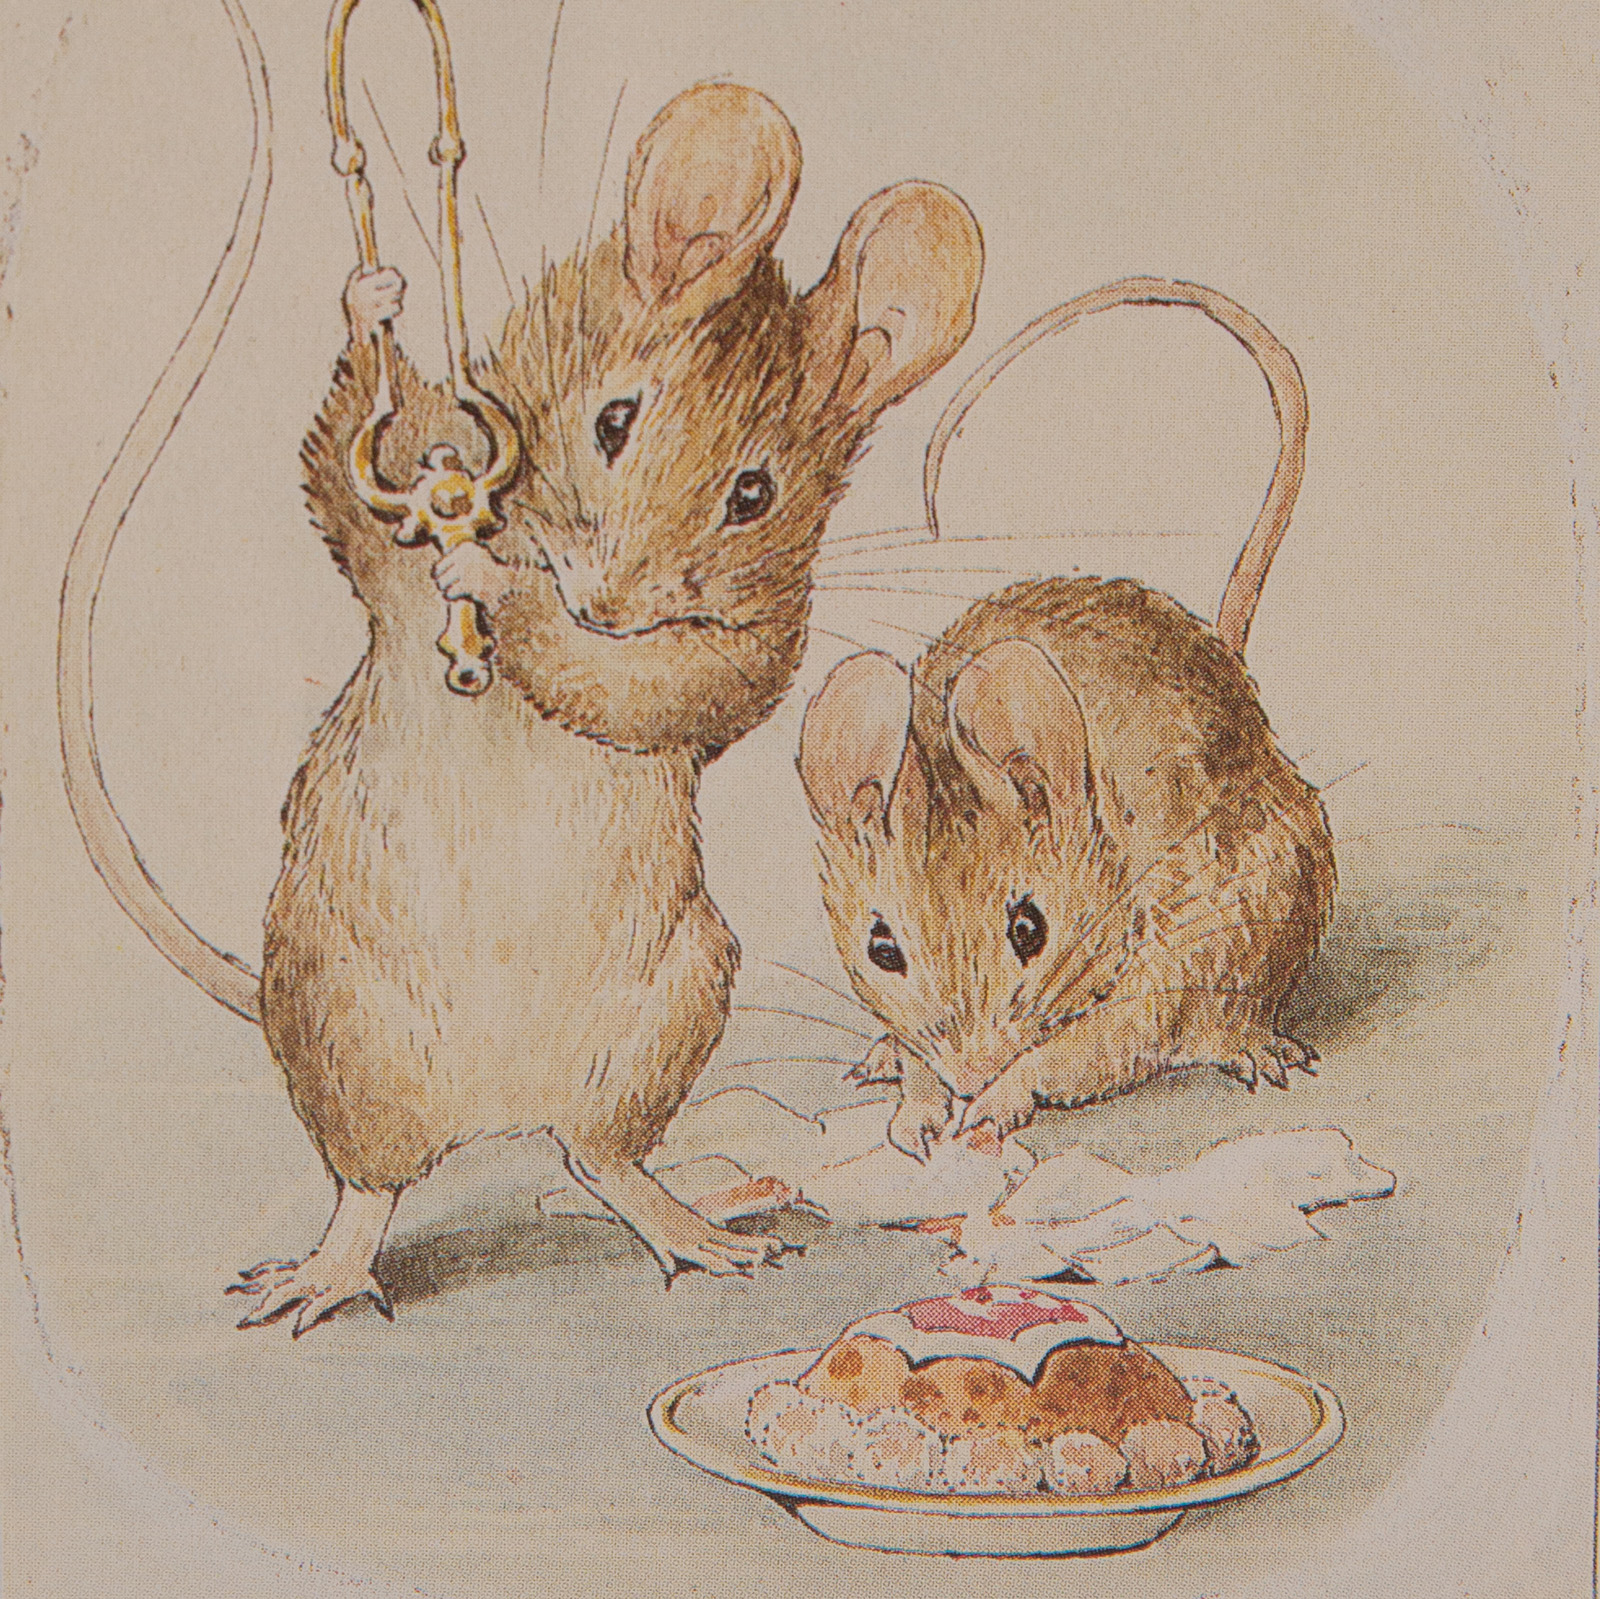 Beatrix Potter: Author, Illustrator, Naturalist, Environmentalist – An Early Woman in STEM